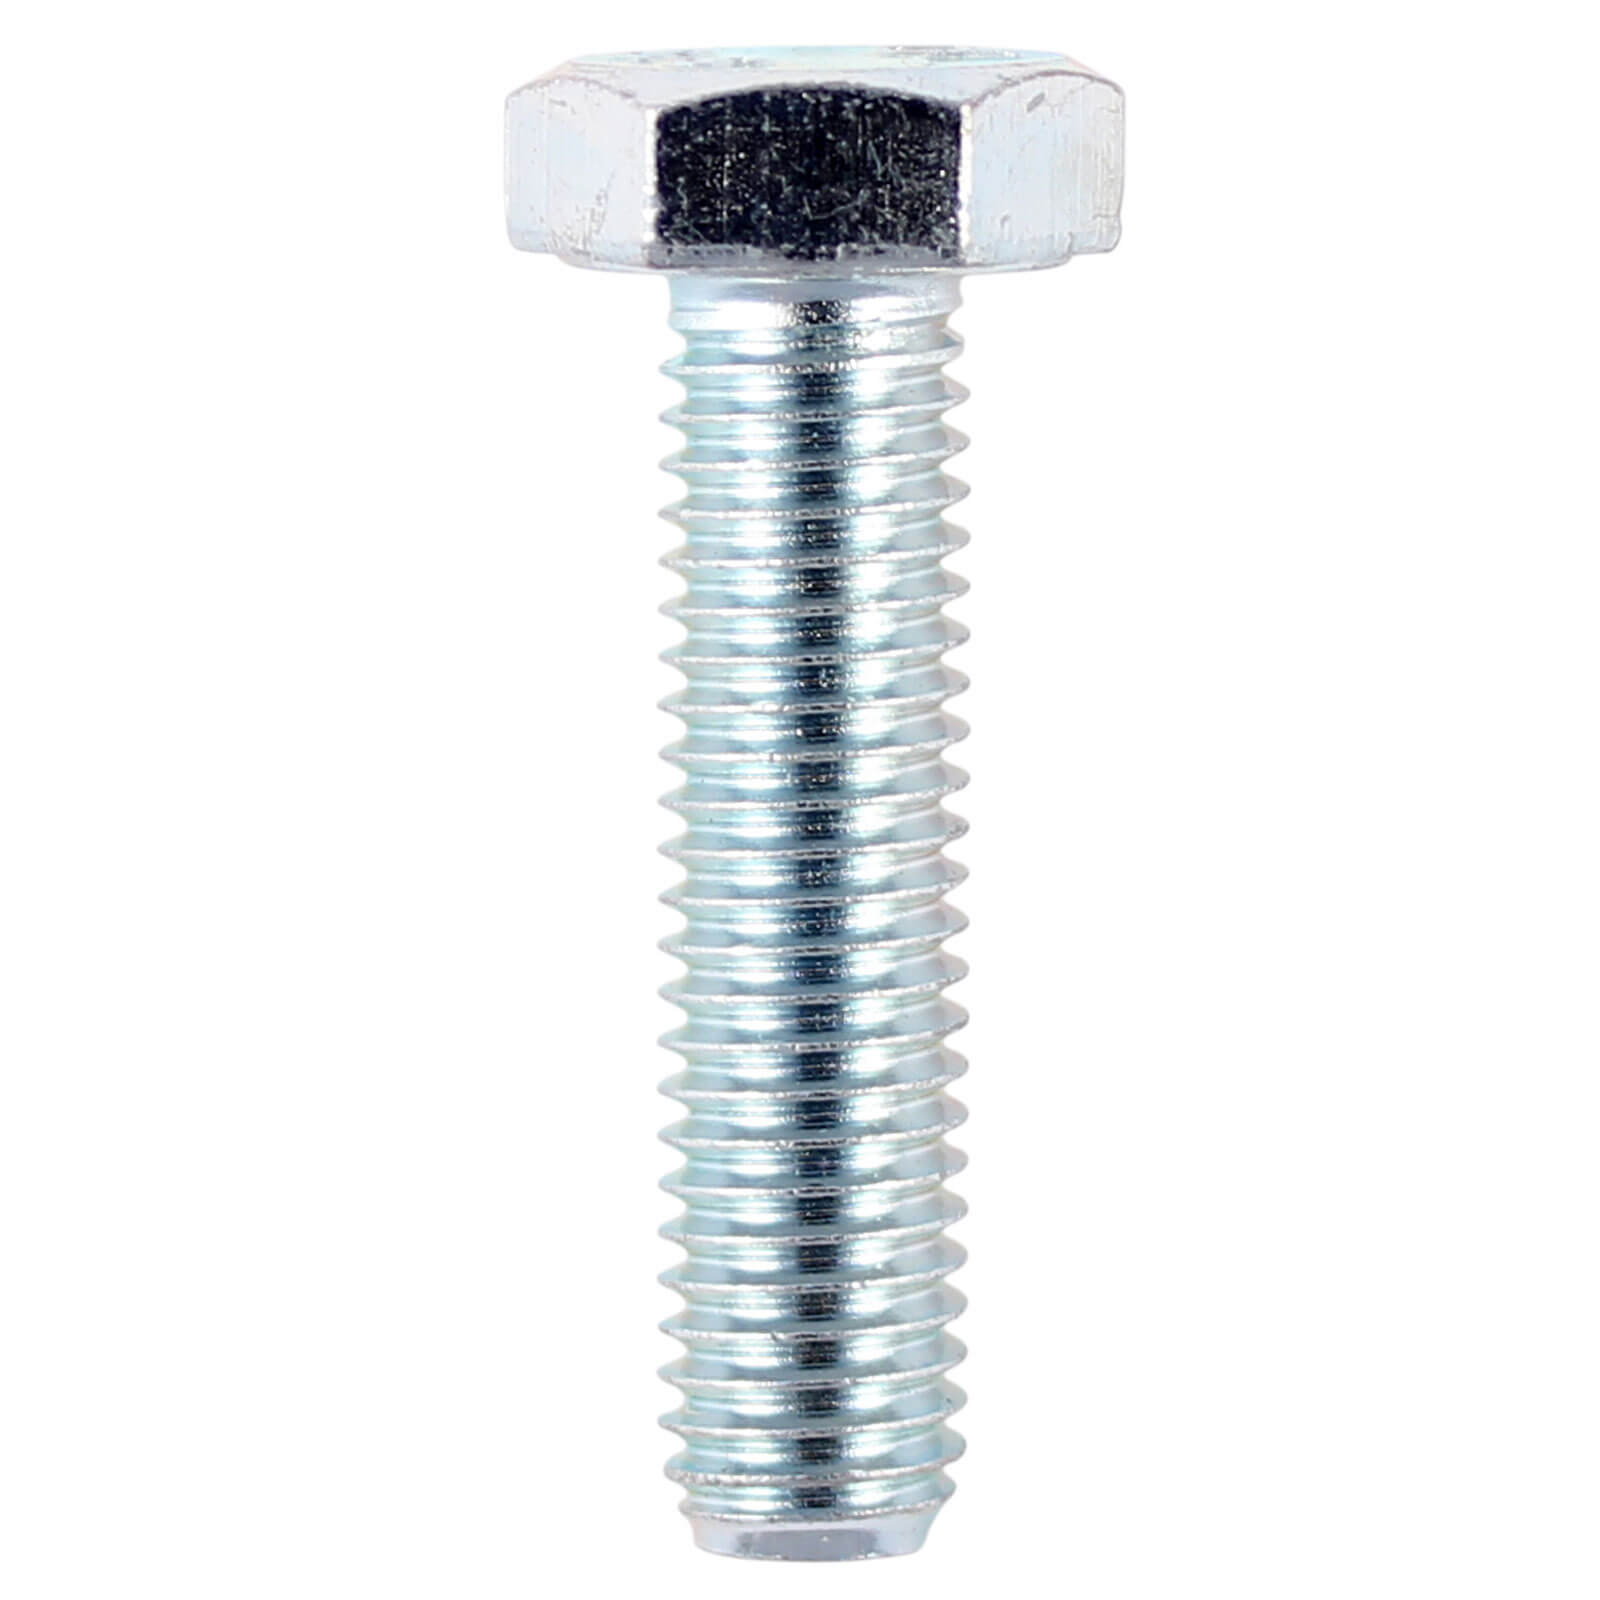 Image of Hexagon High Tensile Set Screw Zinc Plated M10 25mm Pack of 200